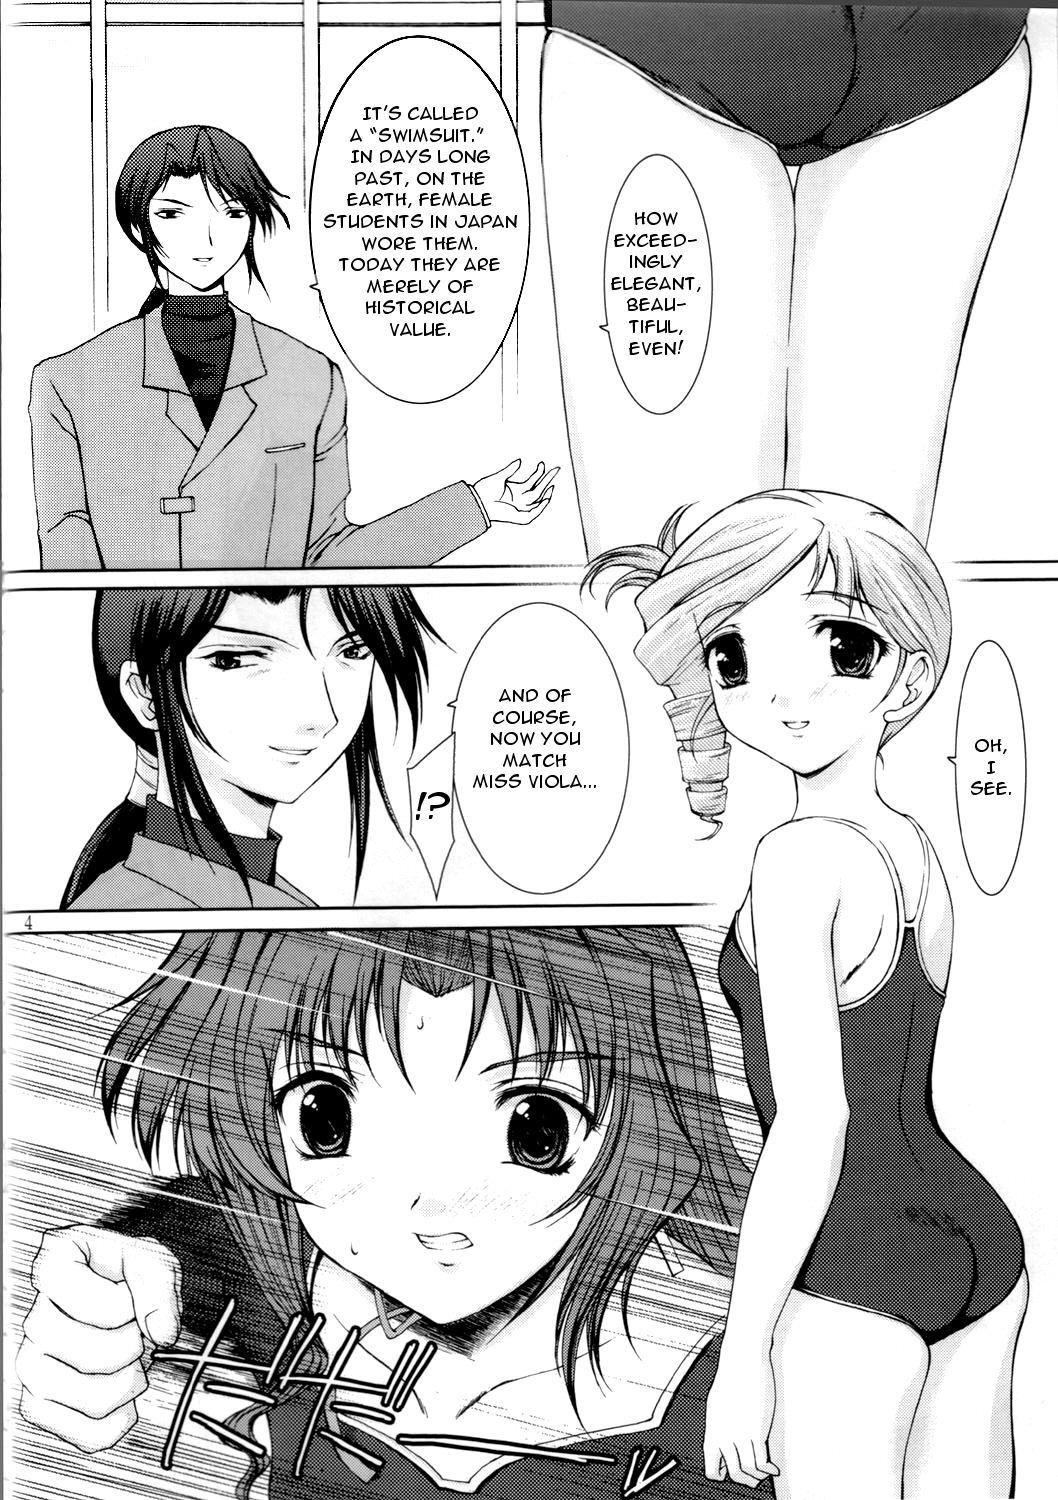 Ex Girlfriend No way you can stop me. - Kiddy grade Teensnow - Page 3